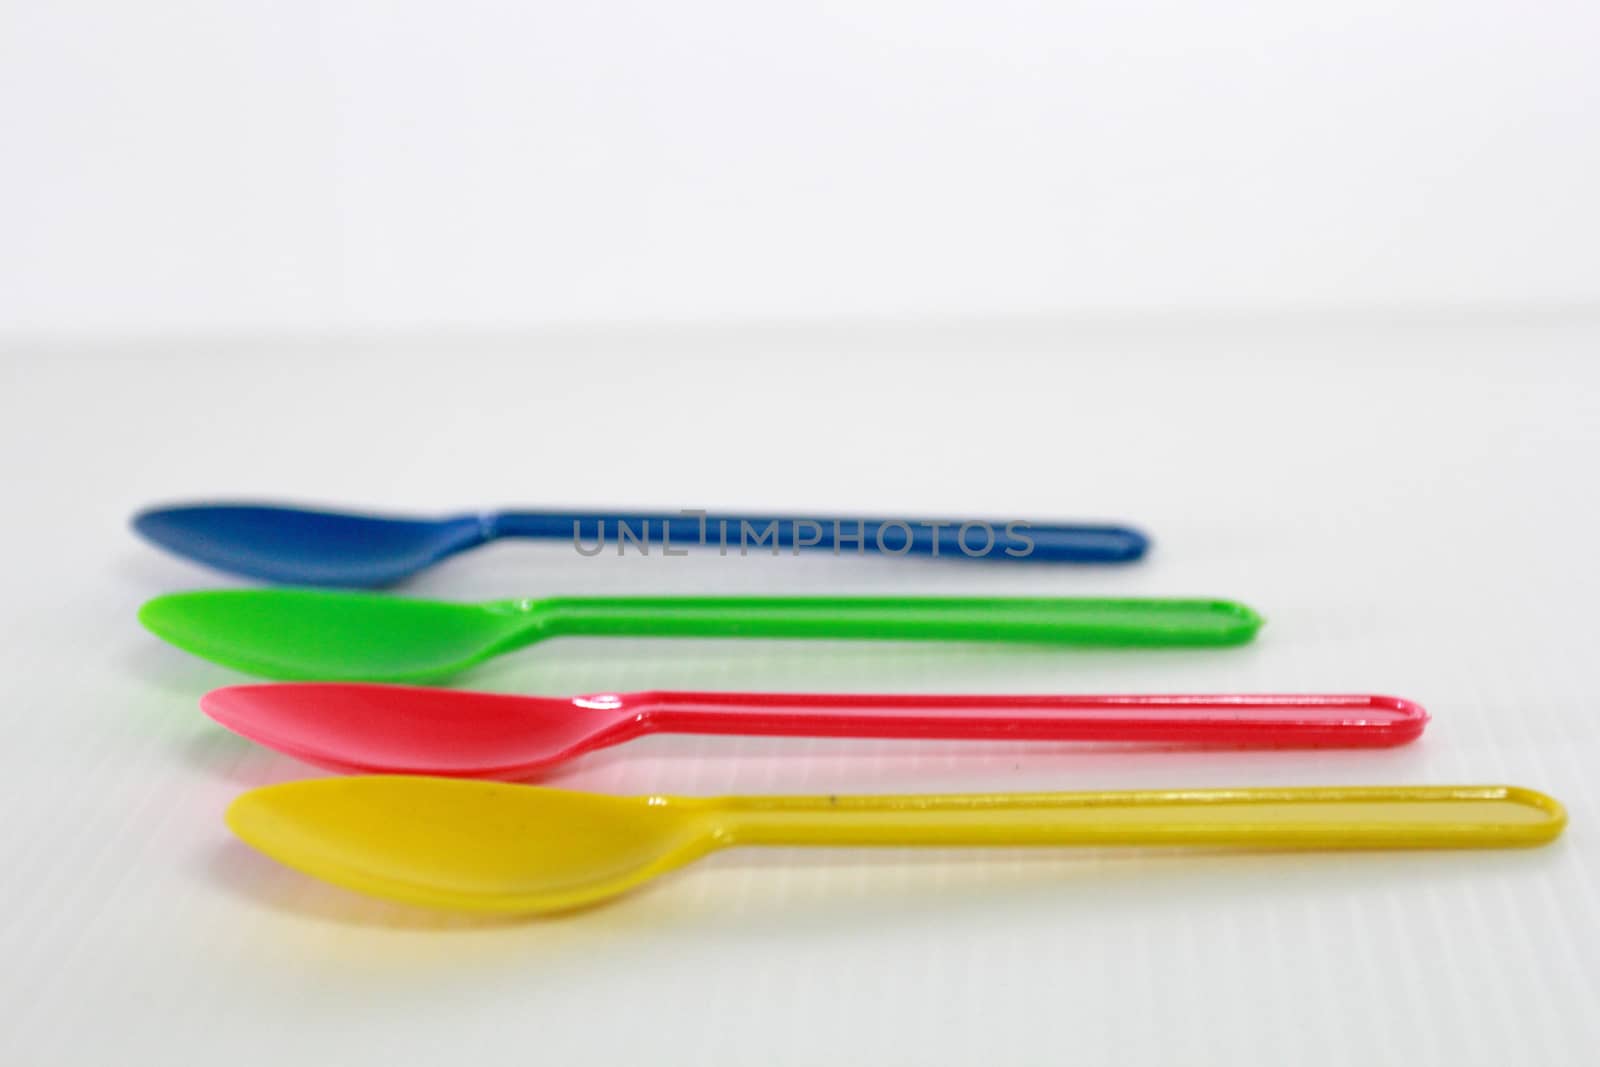 There are colour plastic spoons use for eating icecream and desert.